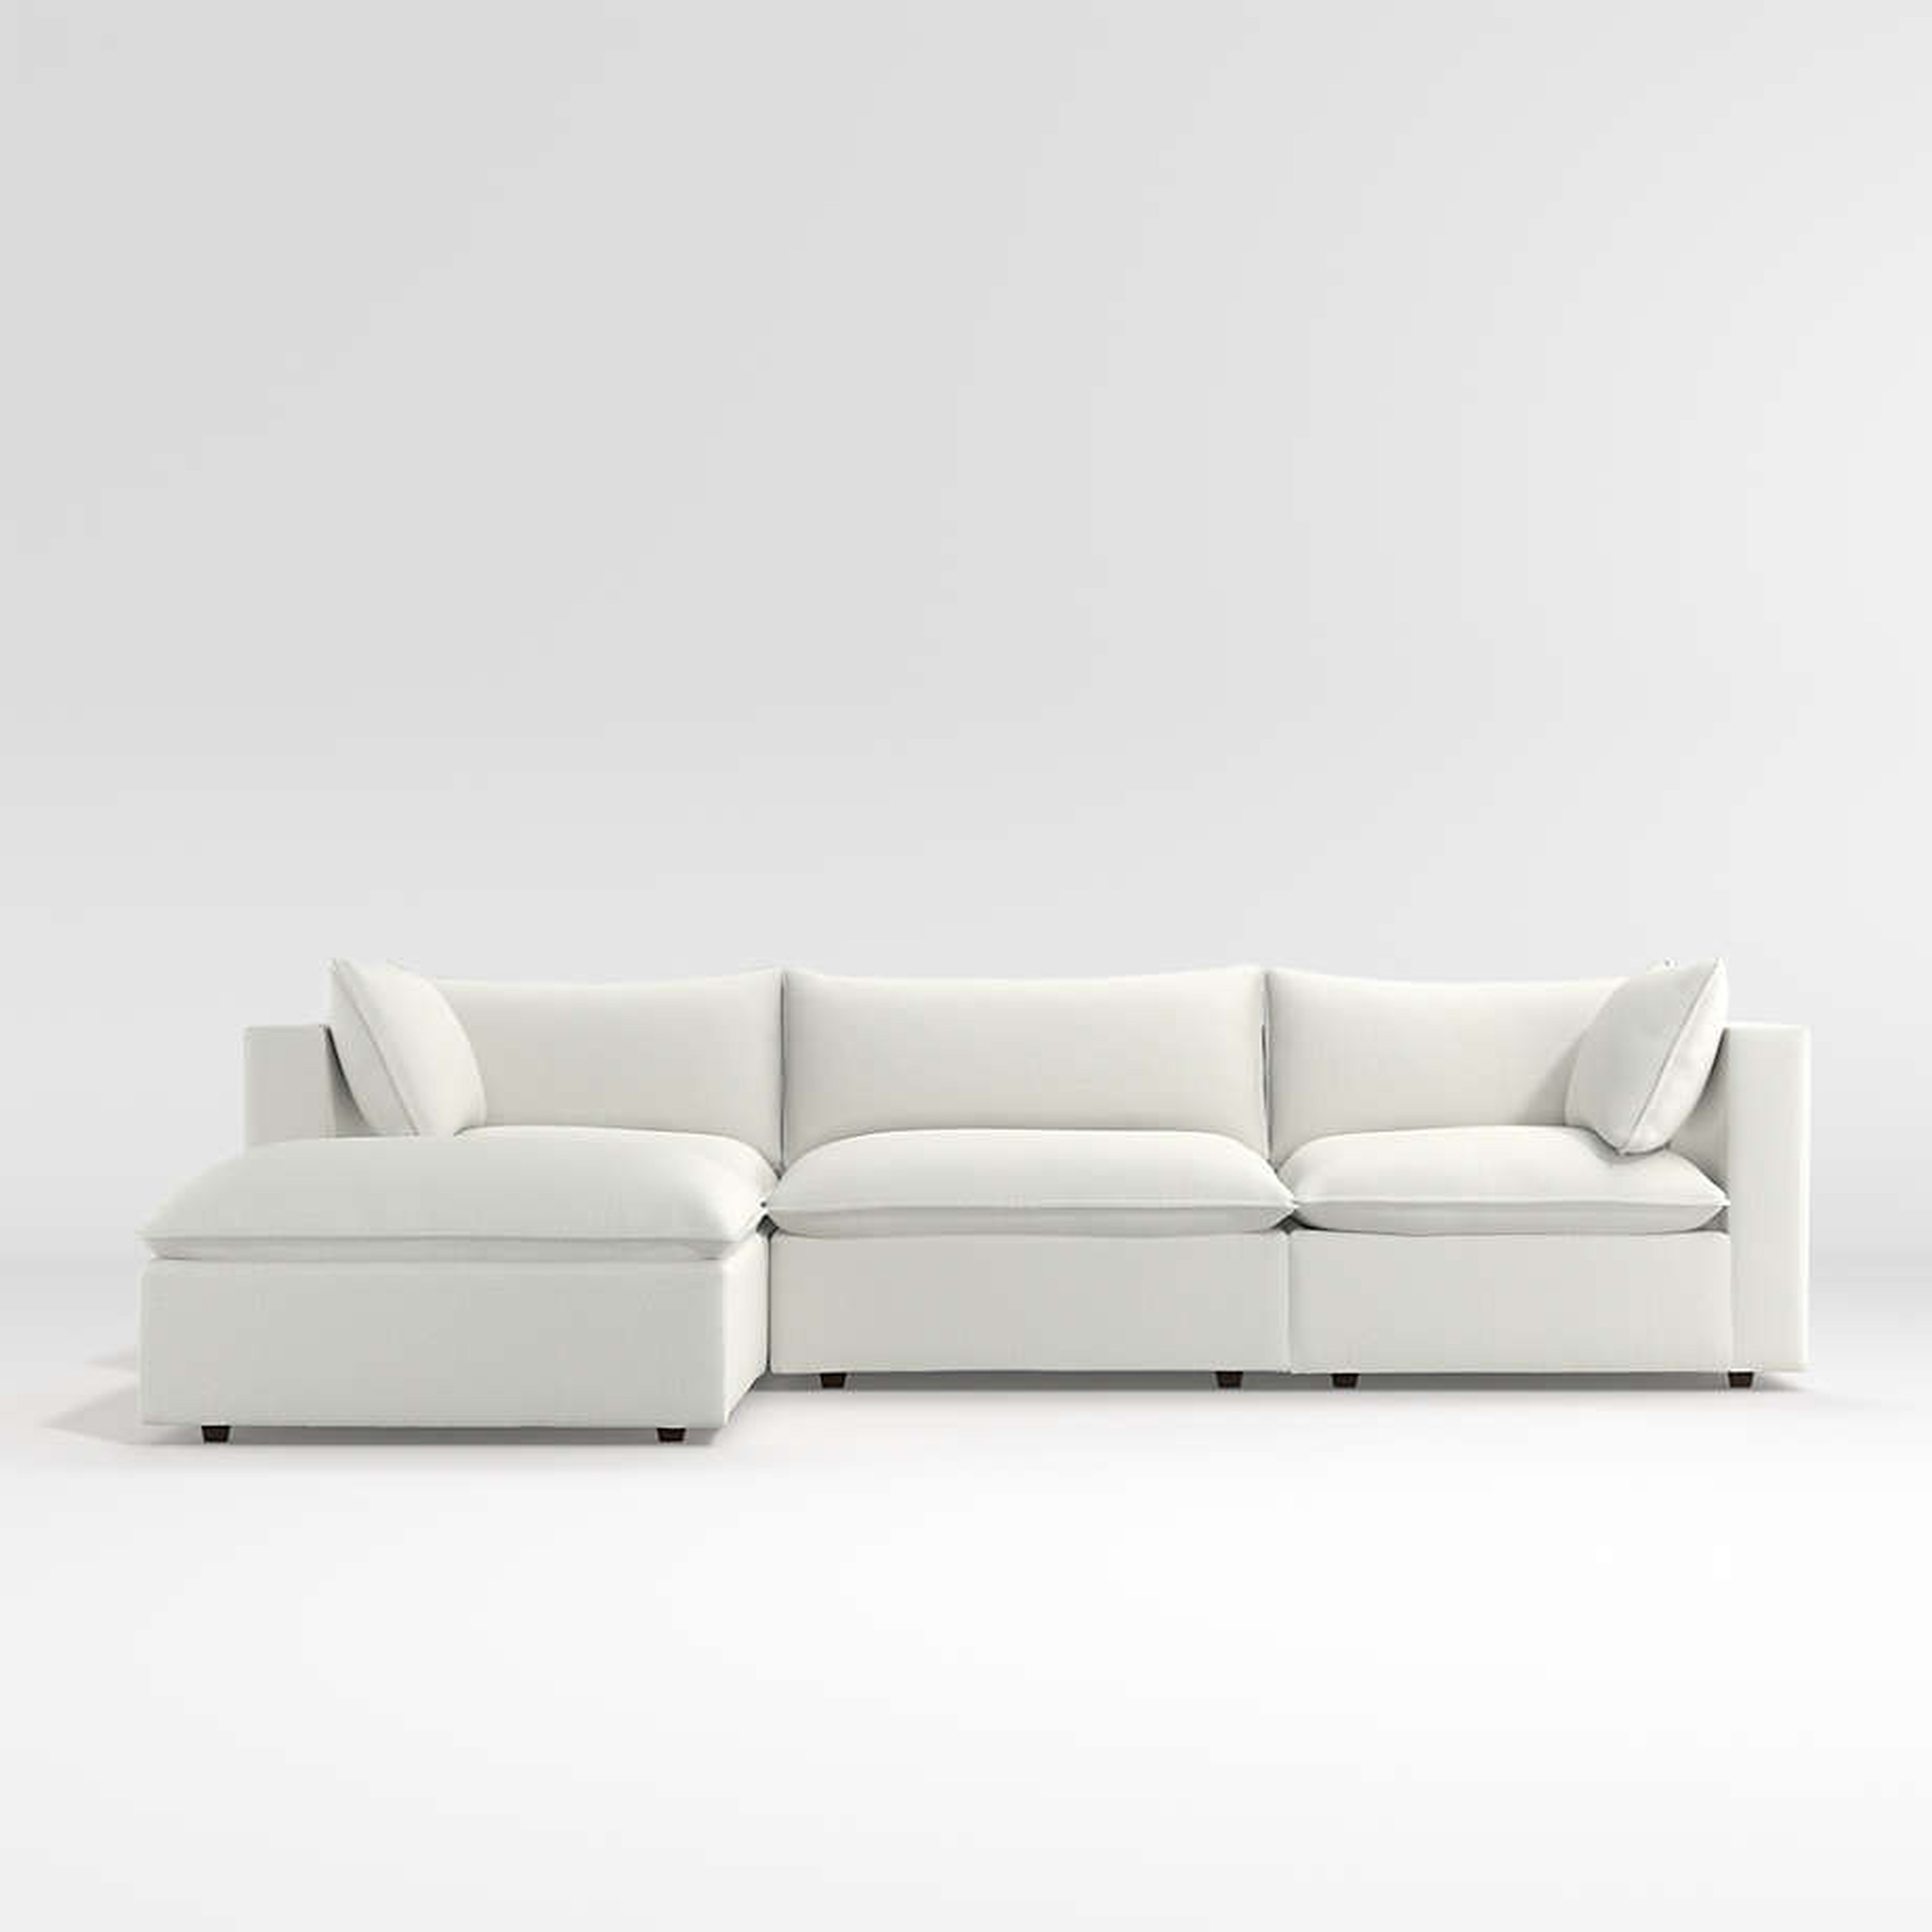 Lotus 4-Piece Reversible Sectional with Ottoman - Crate and Barrel